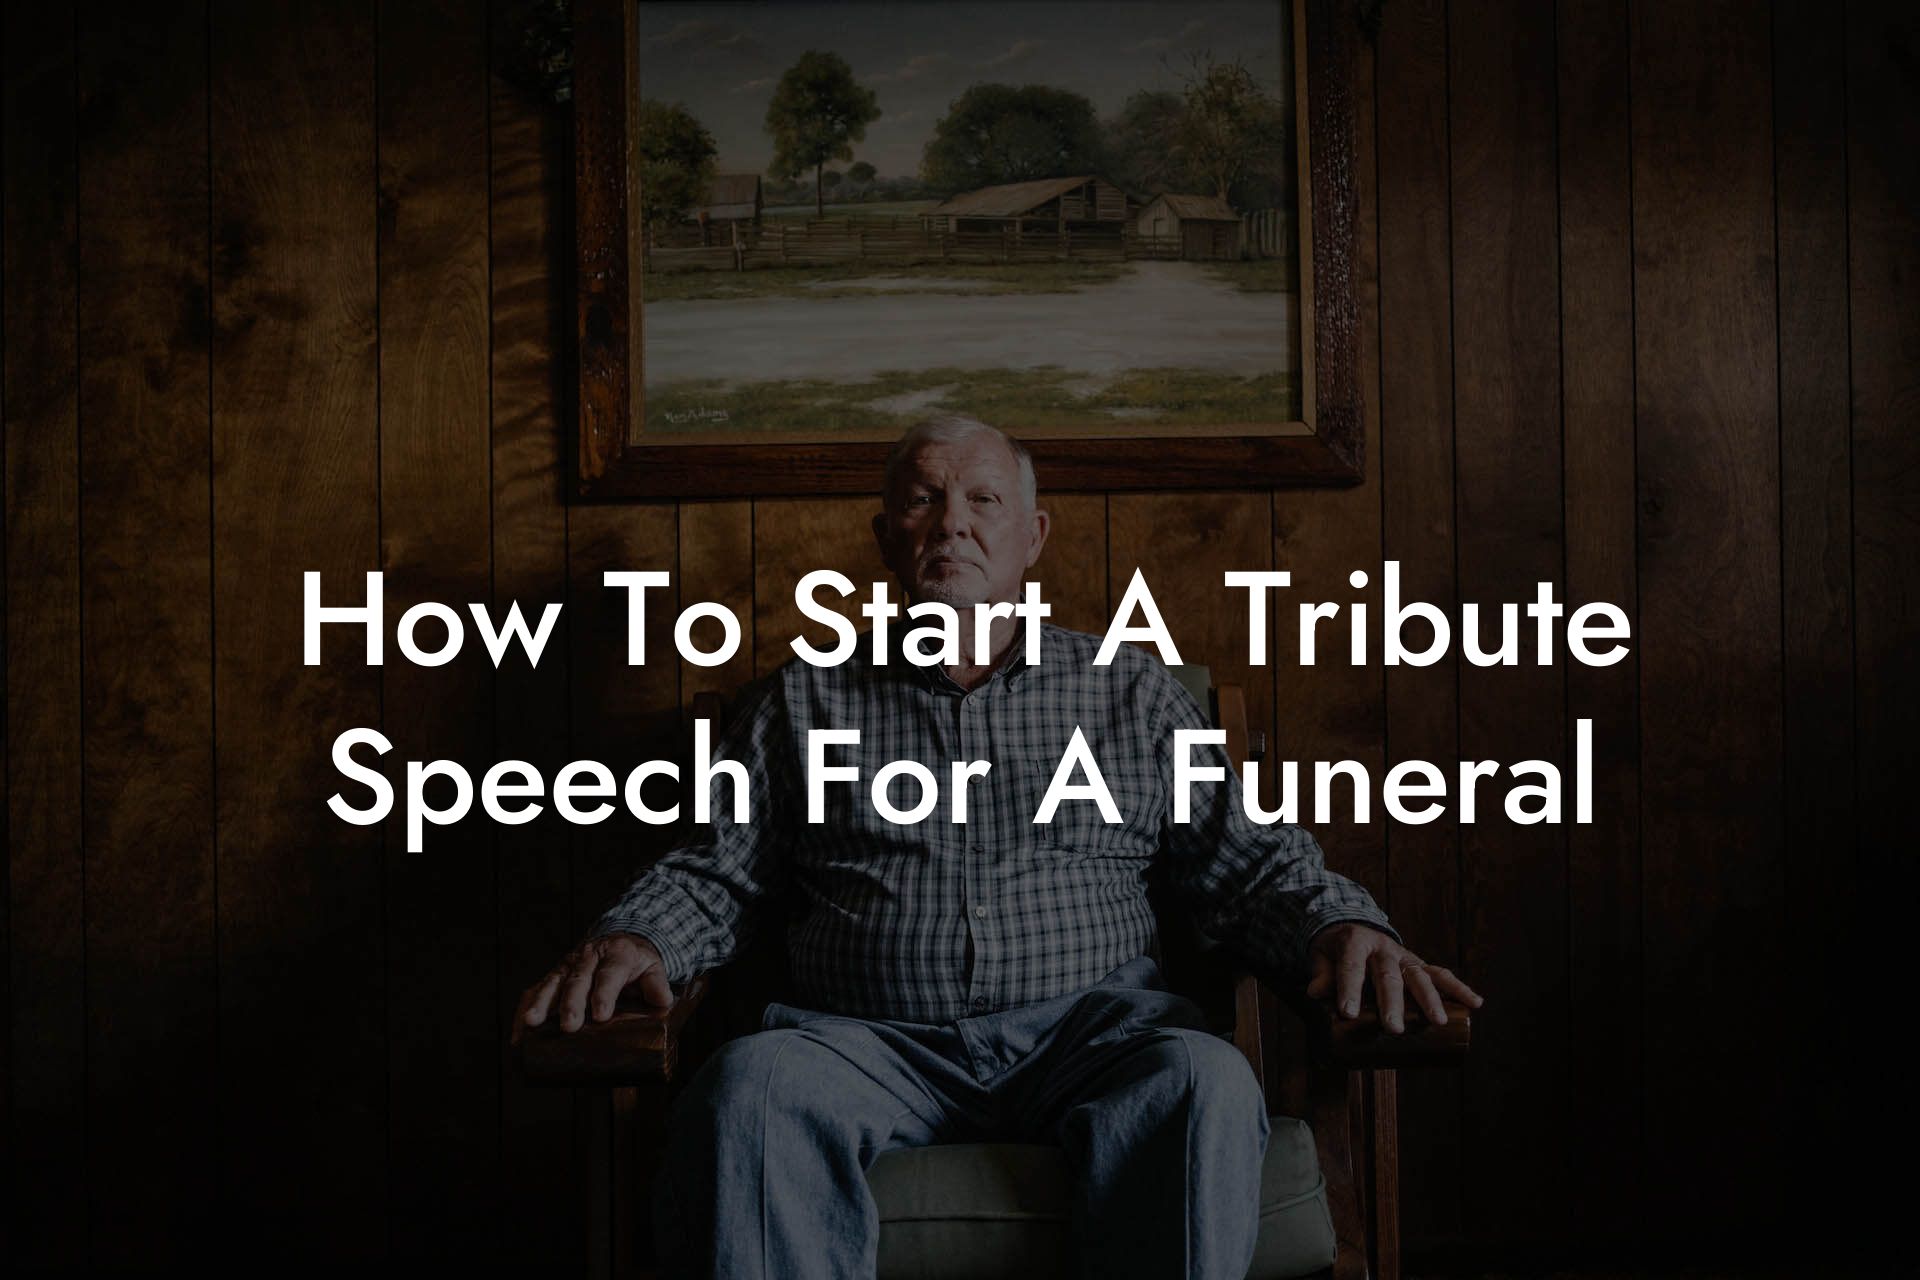 How To Start A Tribute Speech For A Funeral